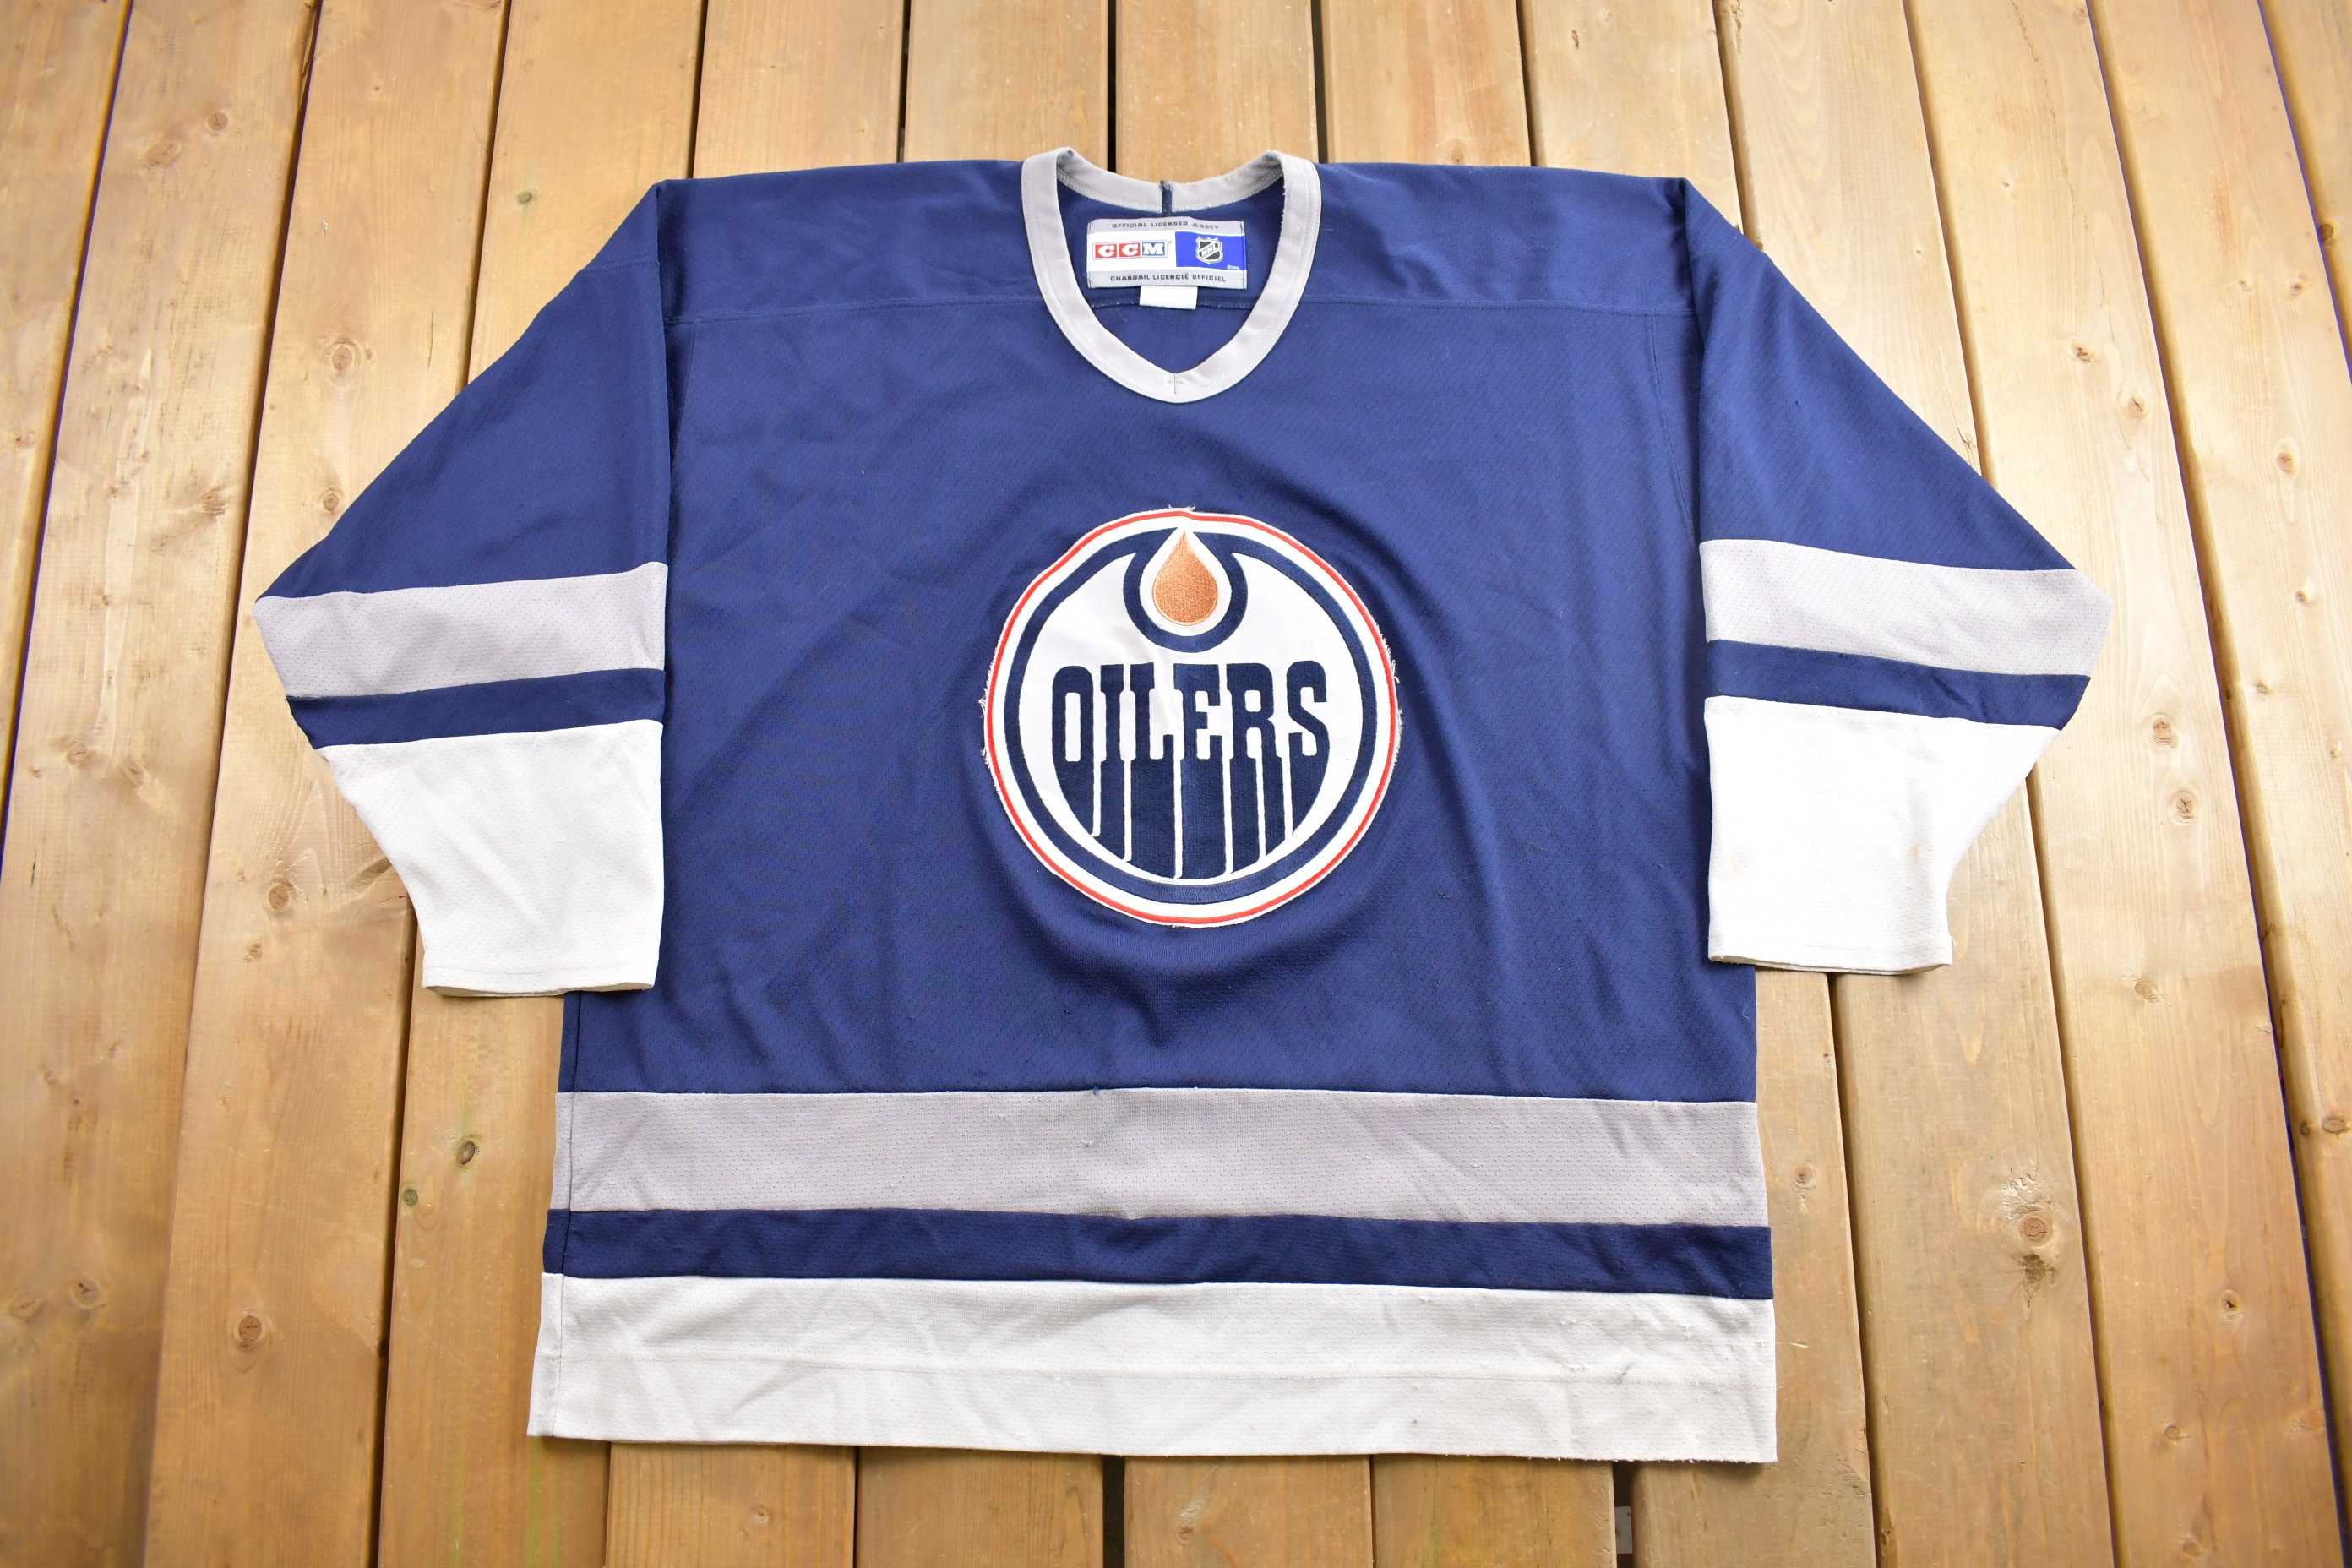 Clearance authentic Oilers Jerseys on Clearance : r/EdmontonOilers